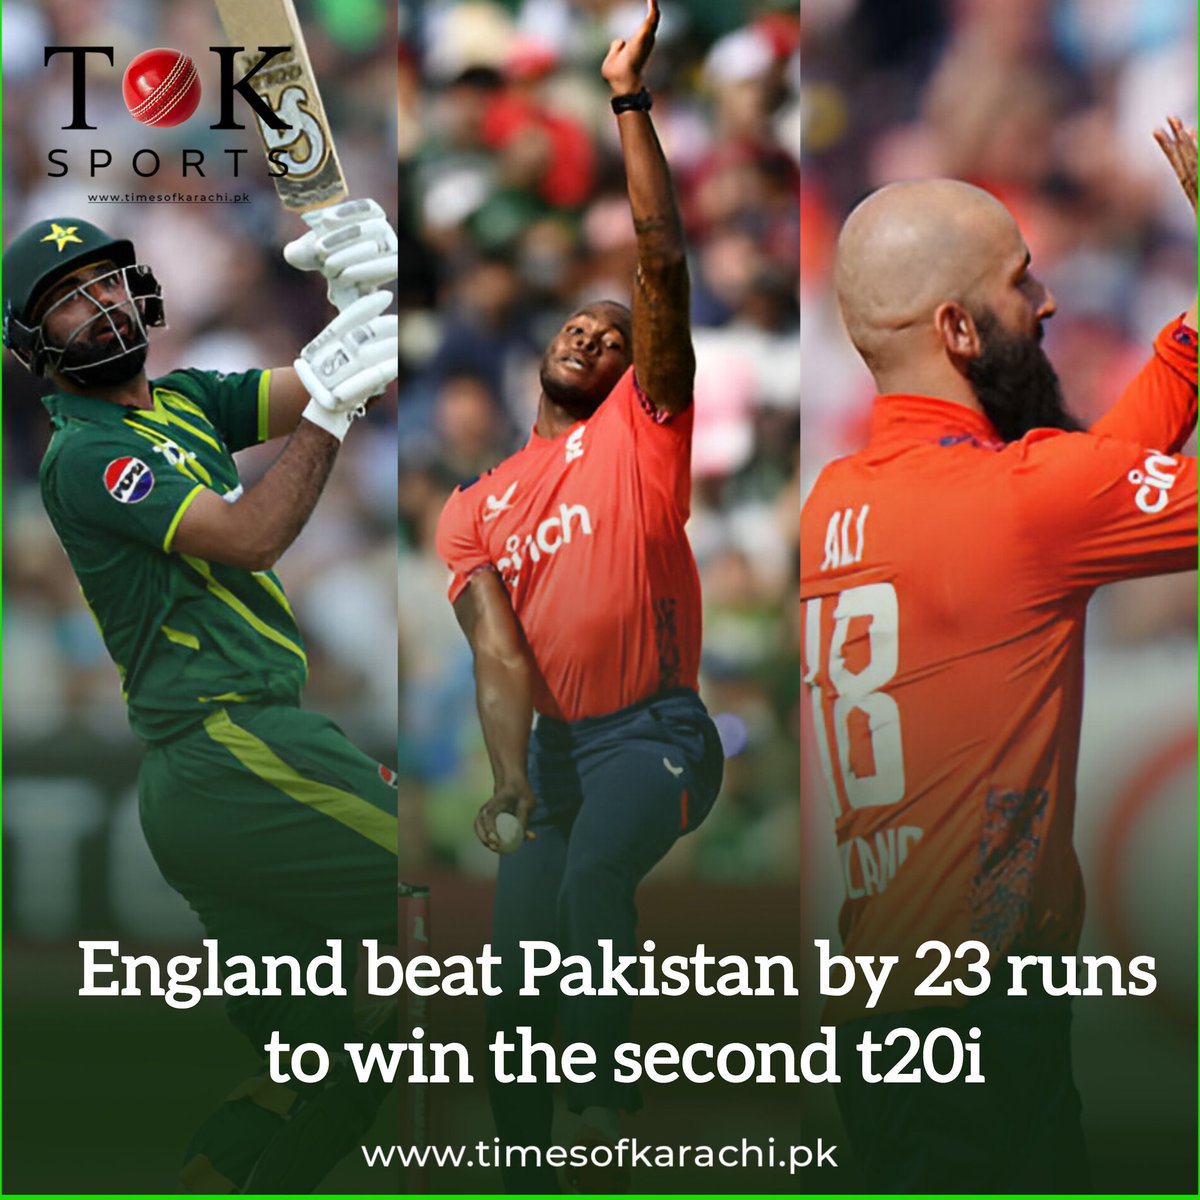 England secured a 23-run win against Pakistan, with Fakhar Zaman scoring 45 as Pakistan's top scorer. Moeen Ali took 2 wickets for 26 runs, and Jofra Archer claimed 2 wickets for 28 runs. #TOKSports #PAKvENG